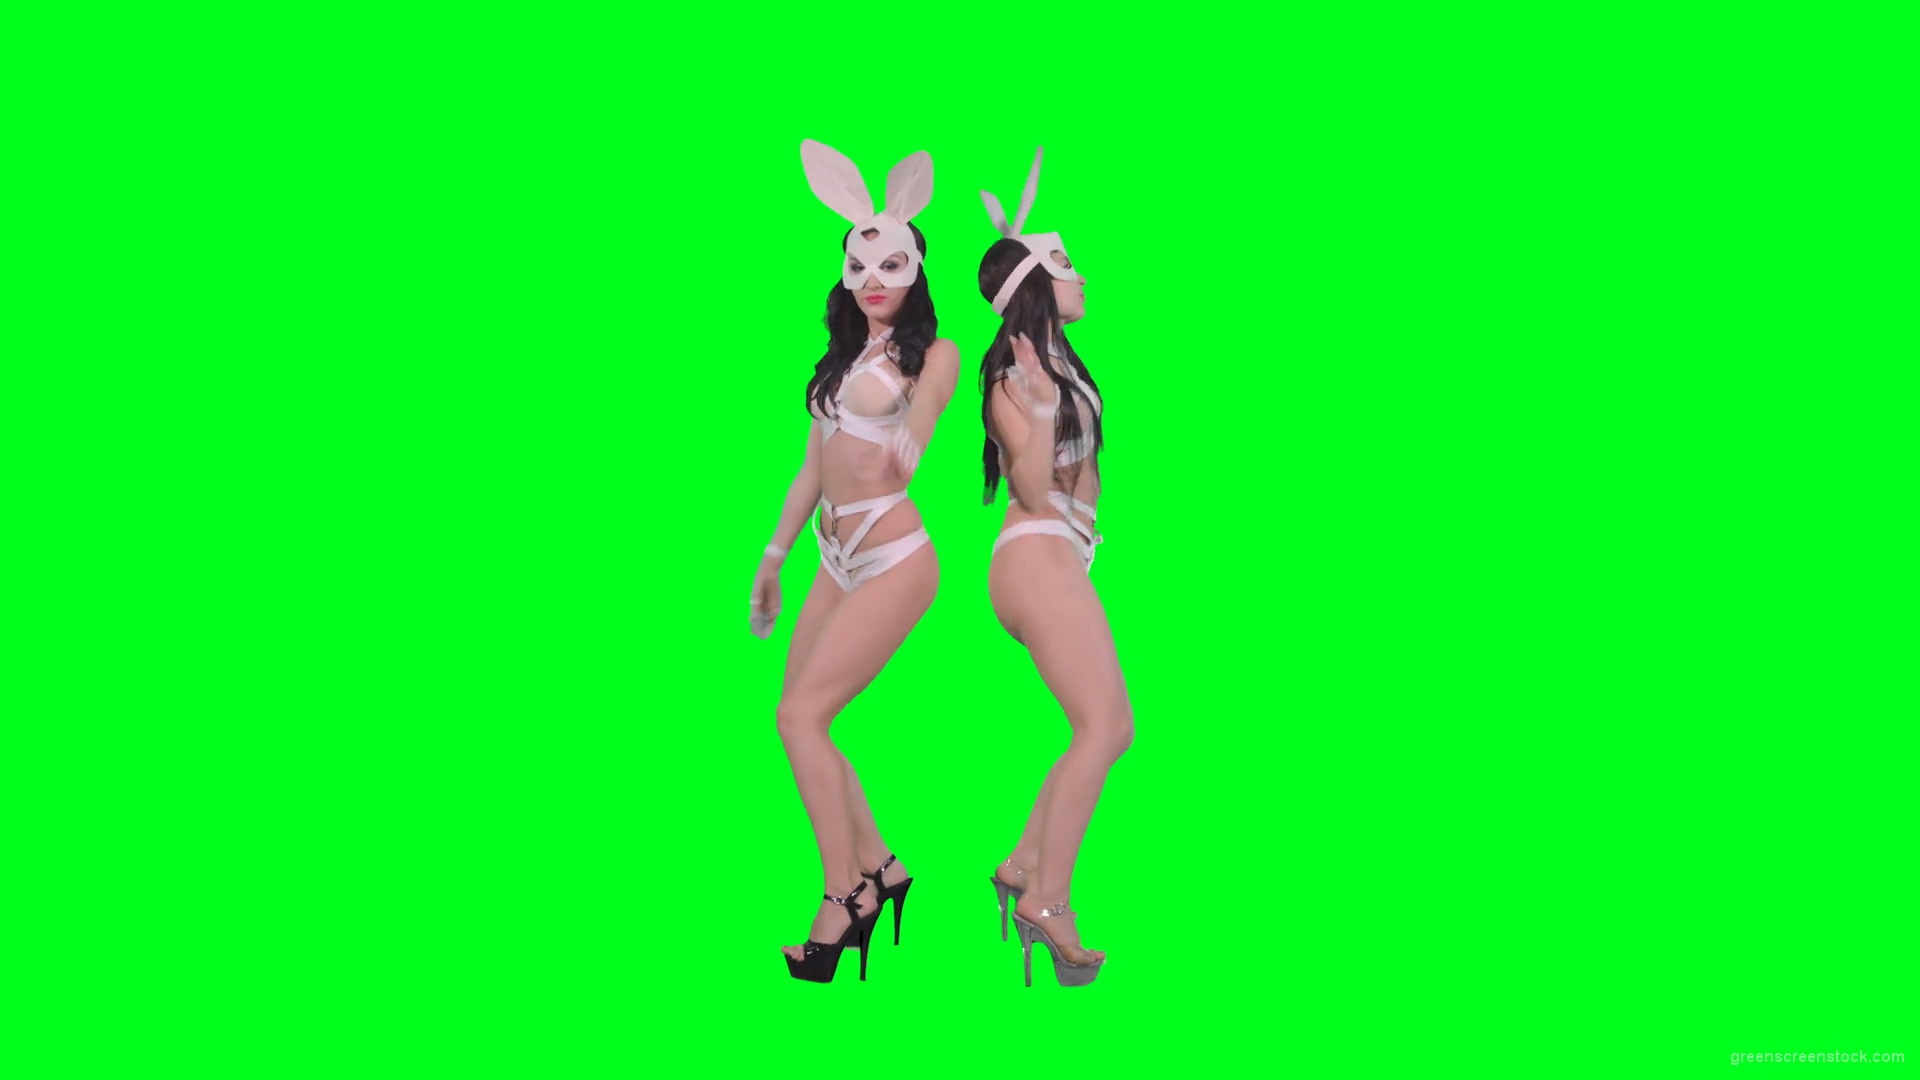 Go-Go-Dancing-female-team-duet-making-erotic-moves-on-green-screen-4K-Video-Footage-1920_008 Green Screen Stock